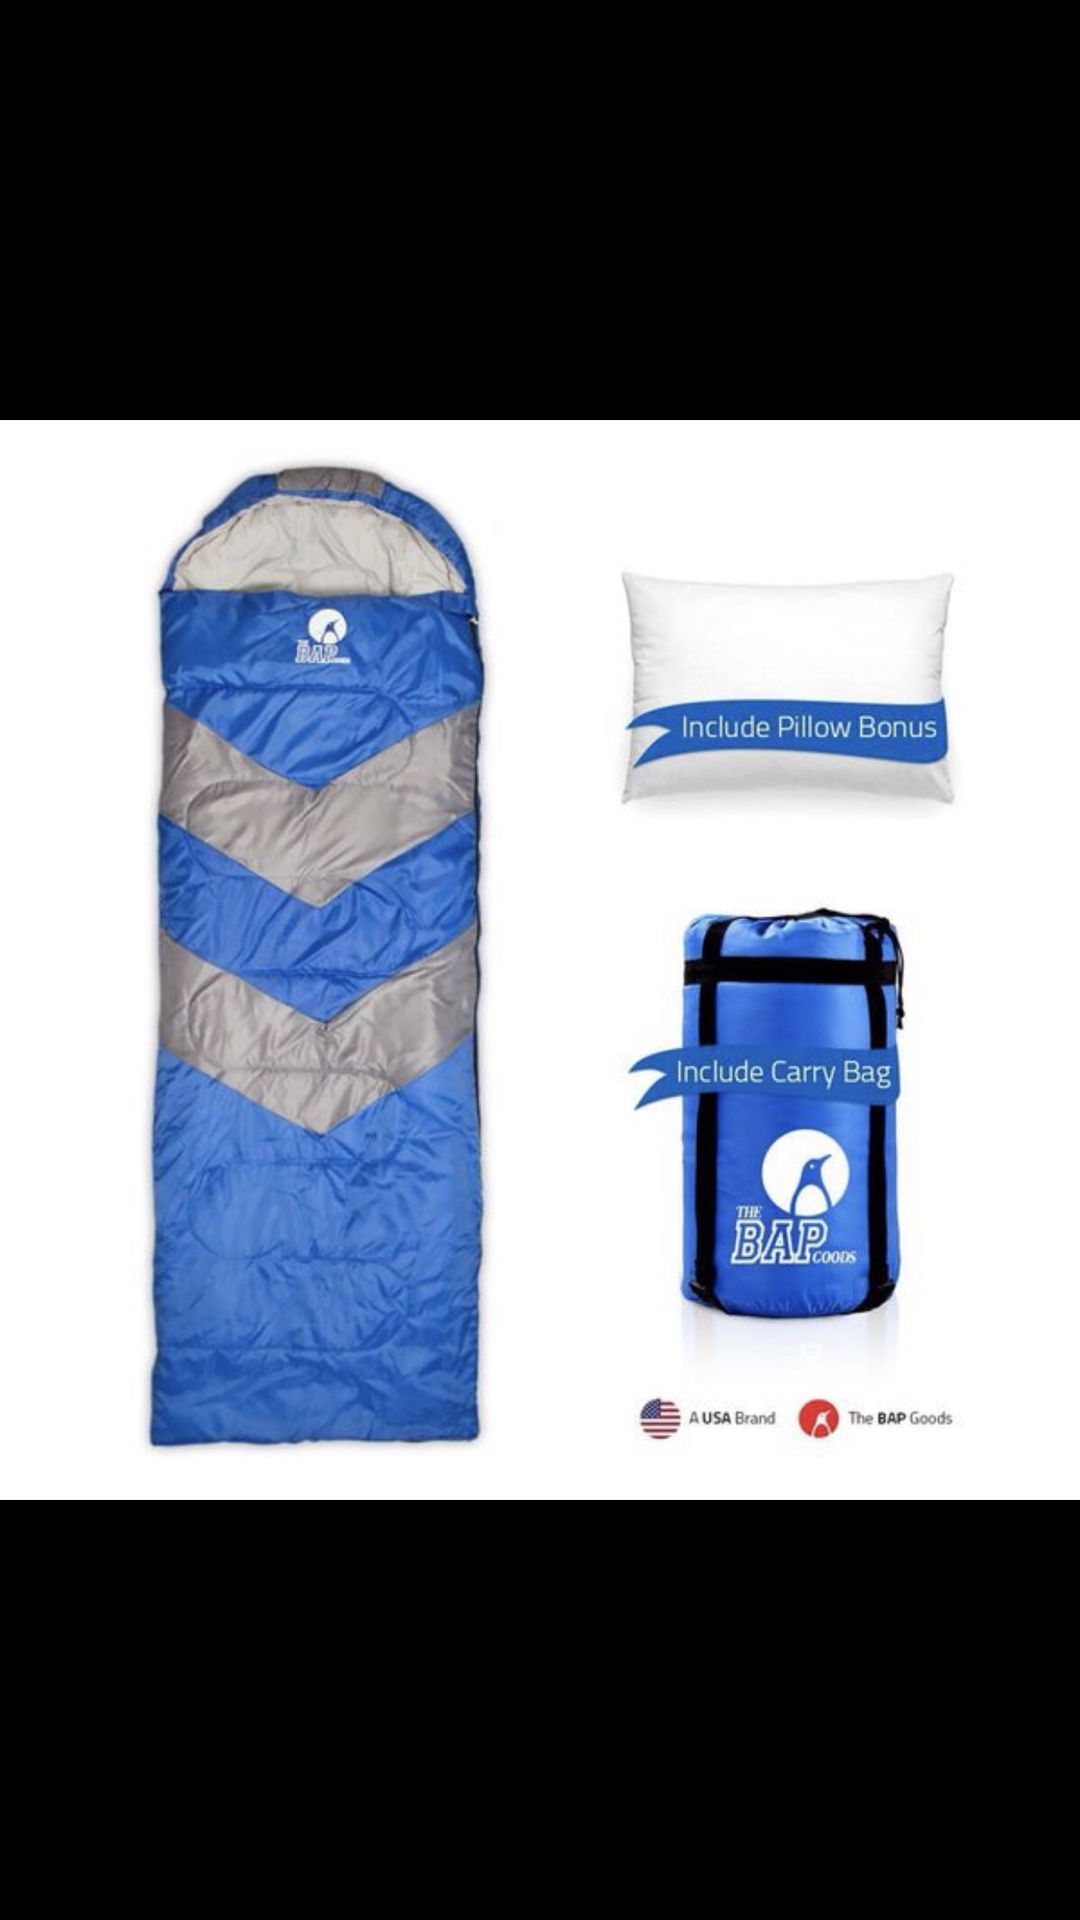 4 New Sleeping Bags 15$/each or 50$ all 4